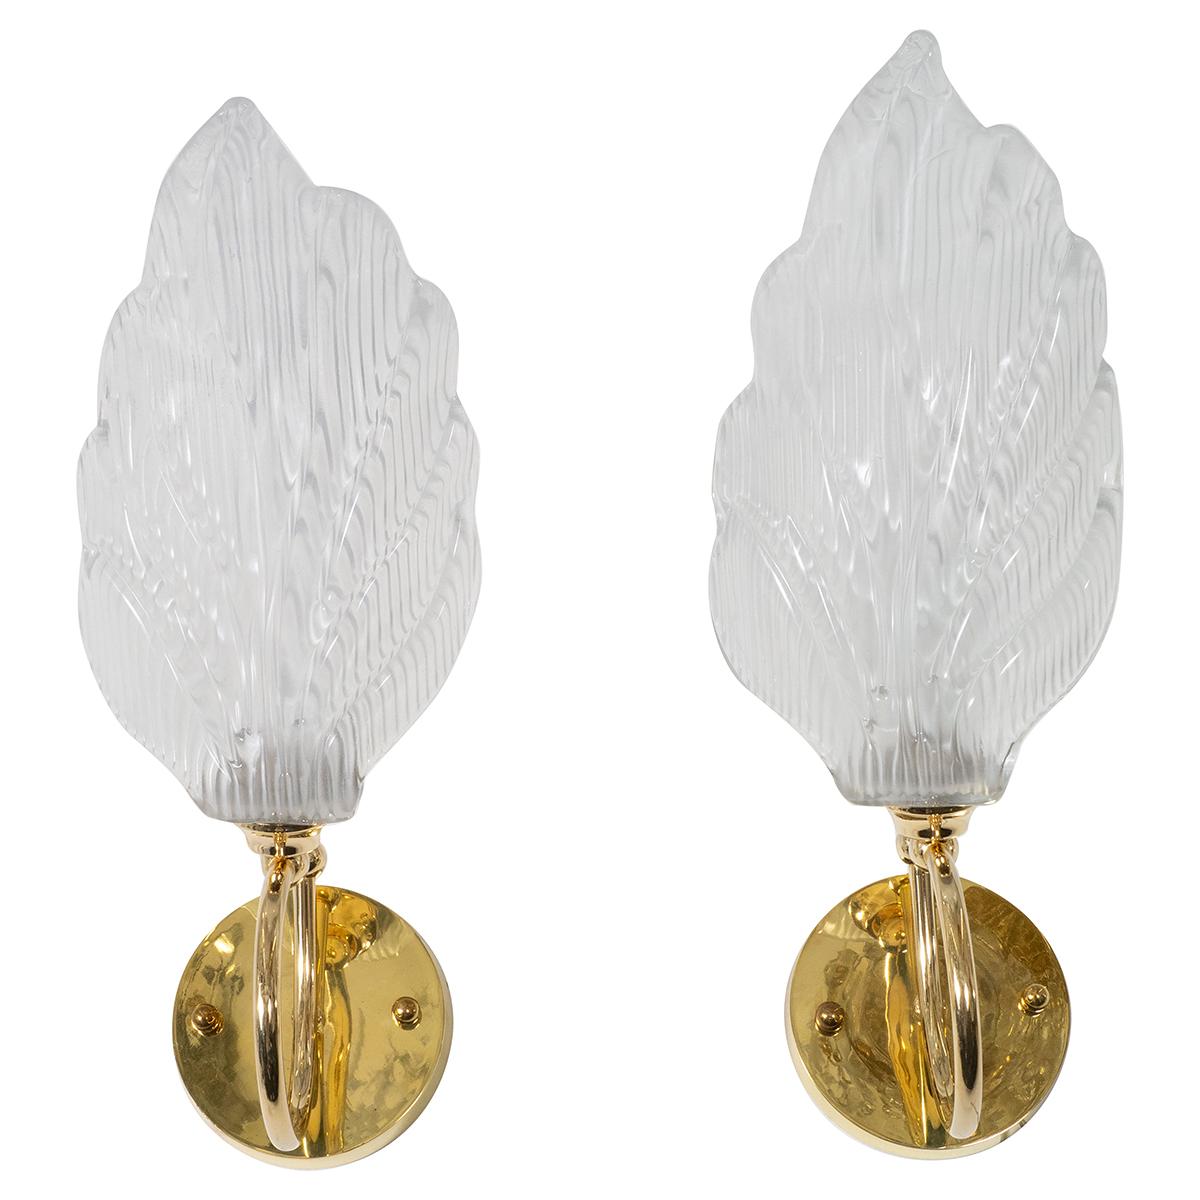 Pair of brass wall sconces with textured Murano glass leaf shades.